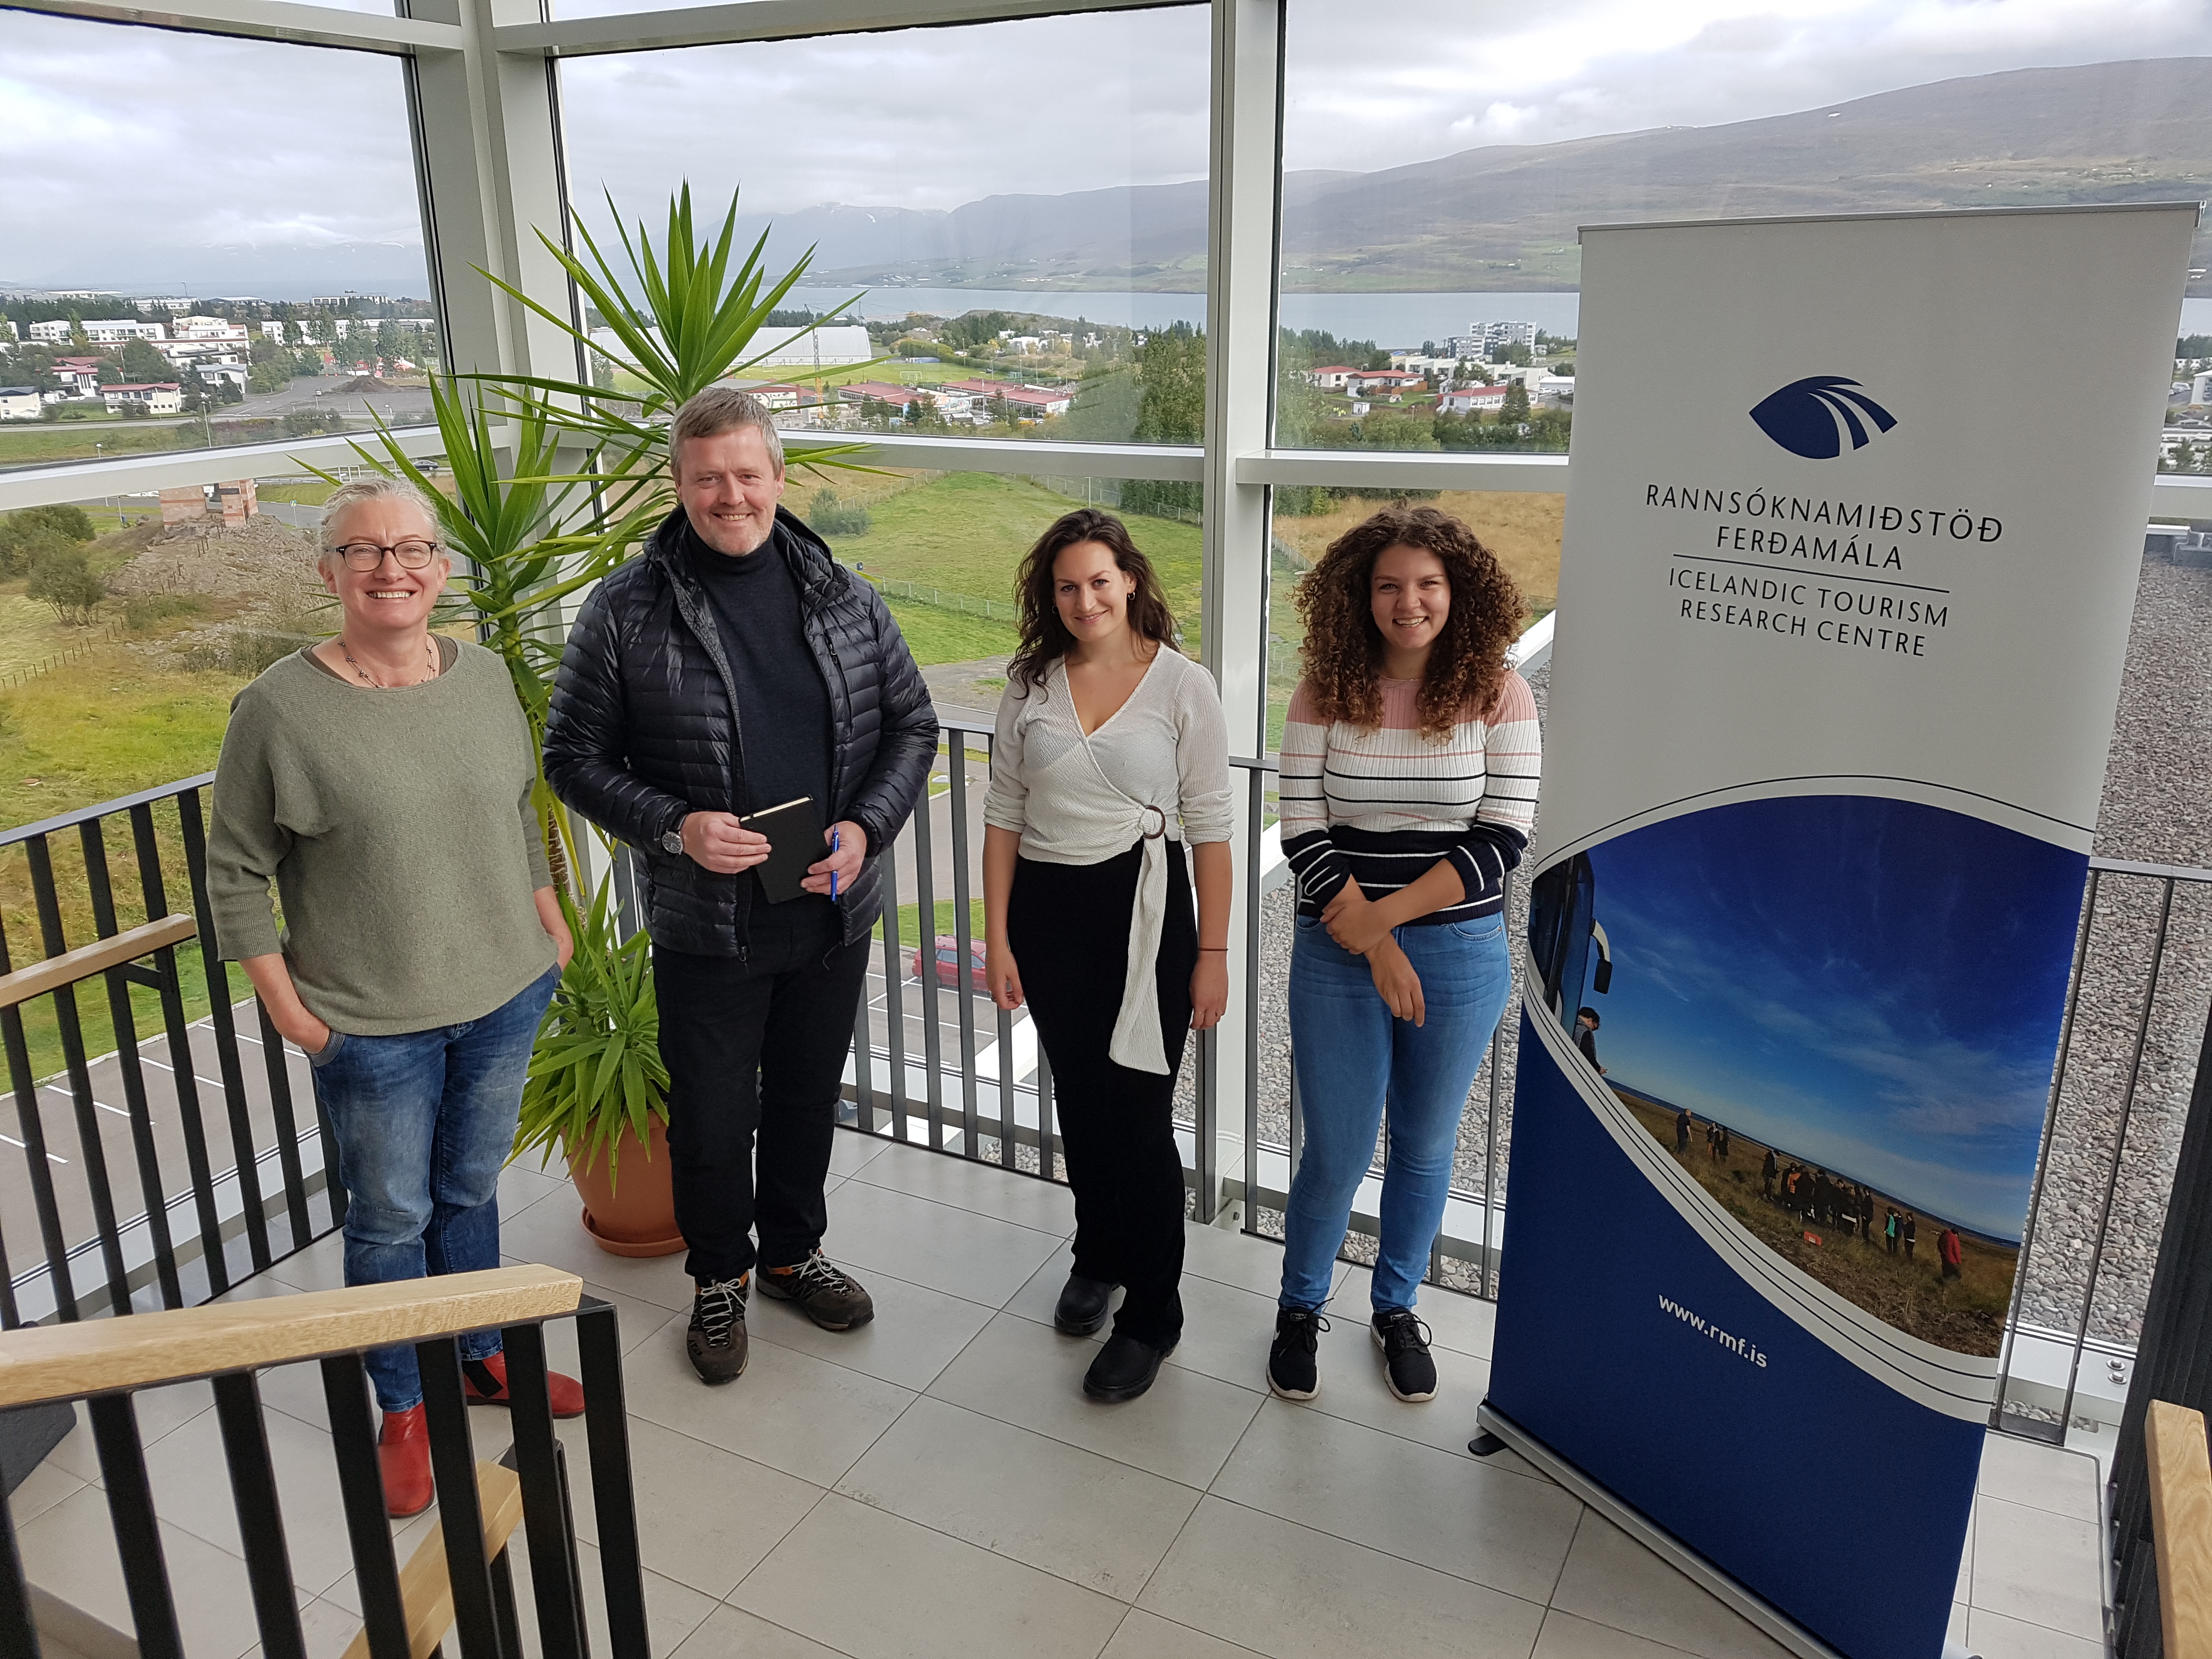 Interns Anneke (right) and Sascha (second from right) with the ITRC director Guðrún Þóra (left) and Guðmundur , park ranger in Vatnajökull National Park (second from left)